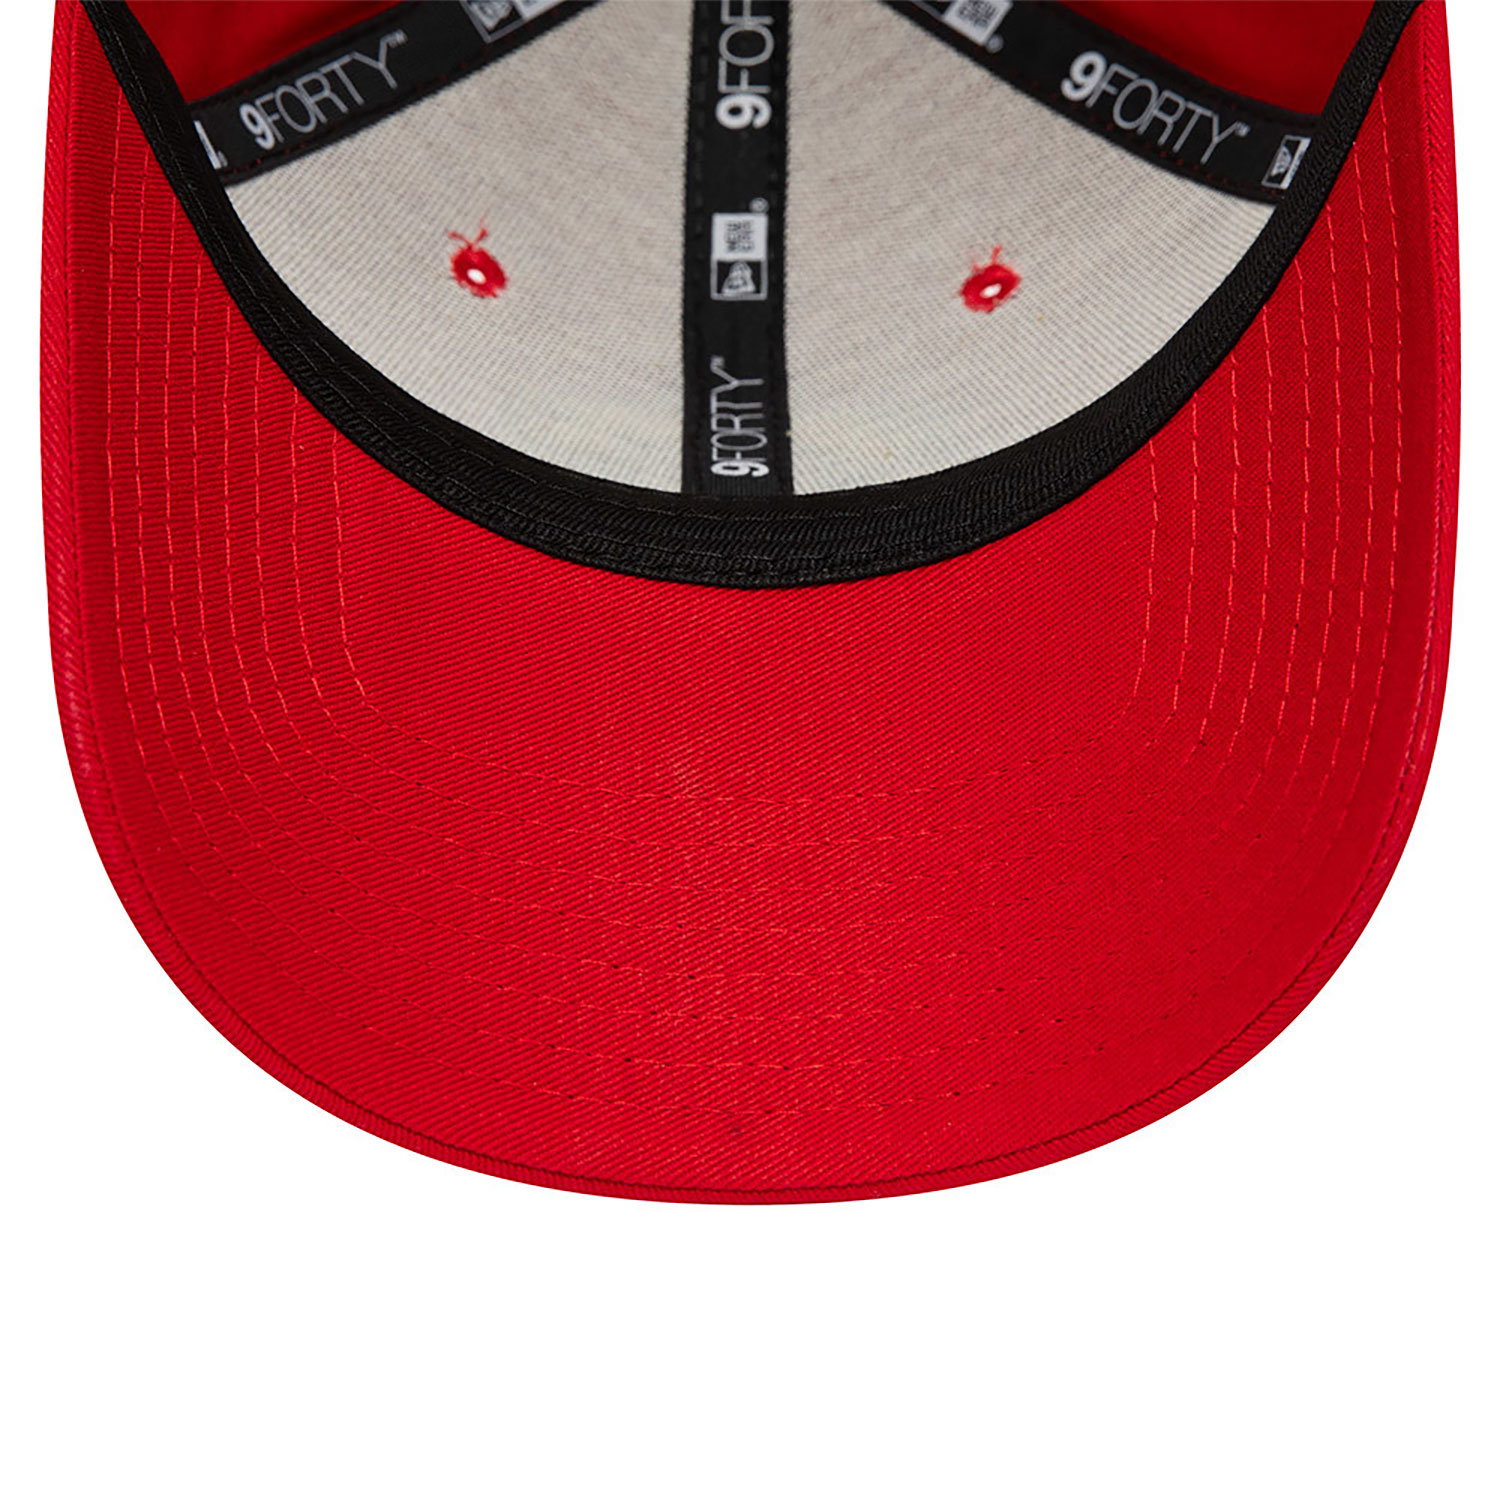 New Era Manchester United 9FORTY Cap Youth